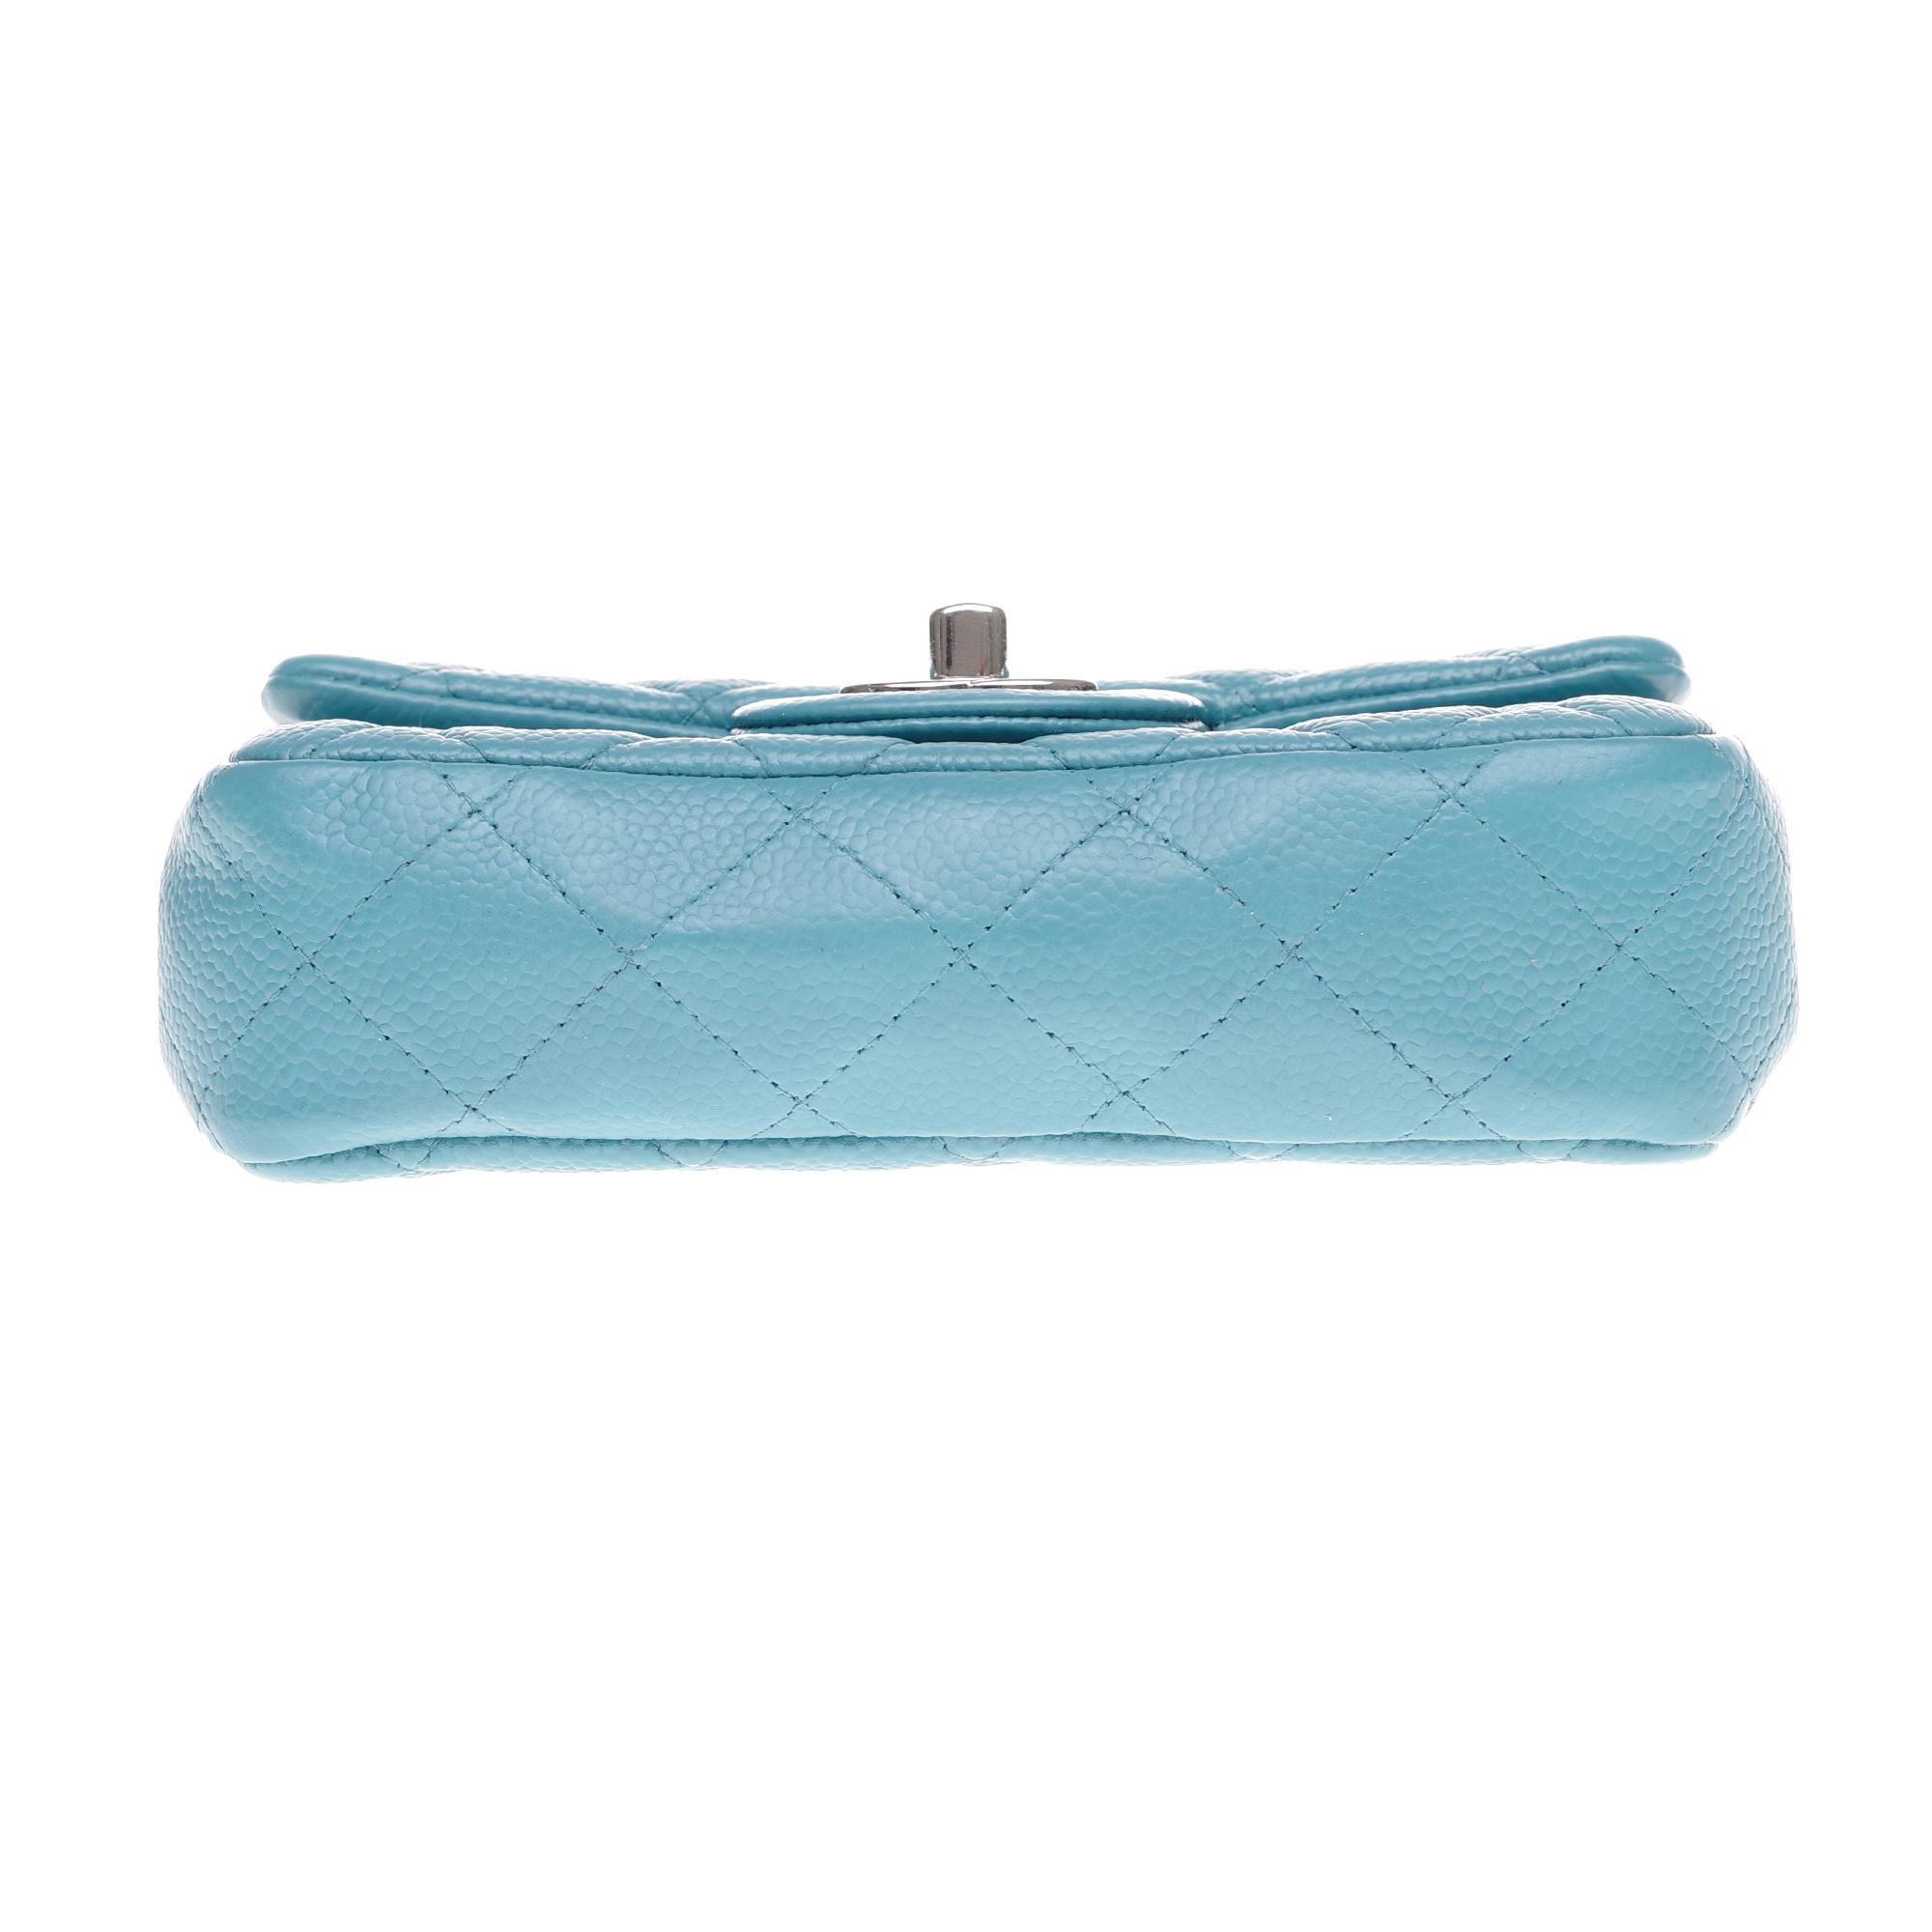 Stunning Mini Chanel shoulder bag in turquoise caviar leather, silver hardware 3